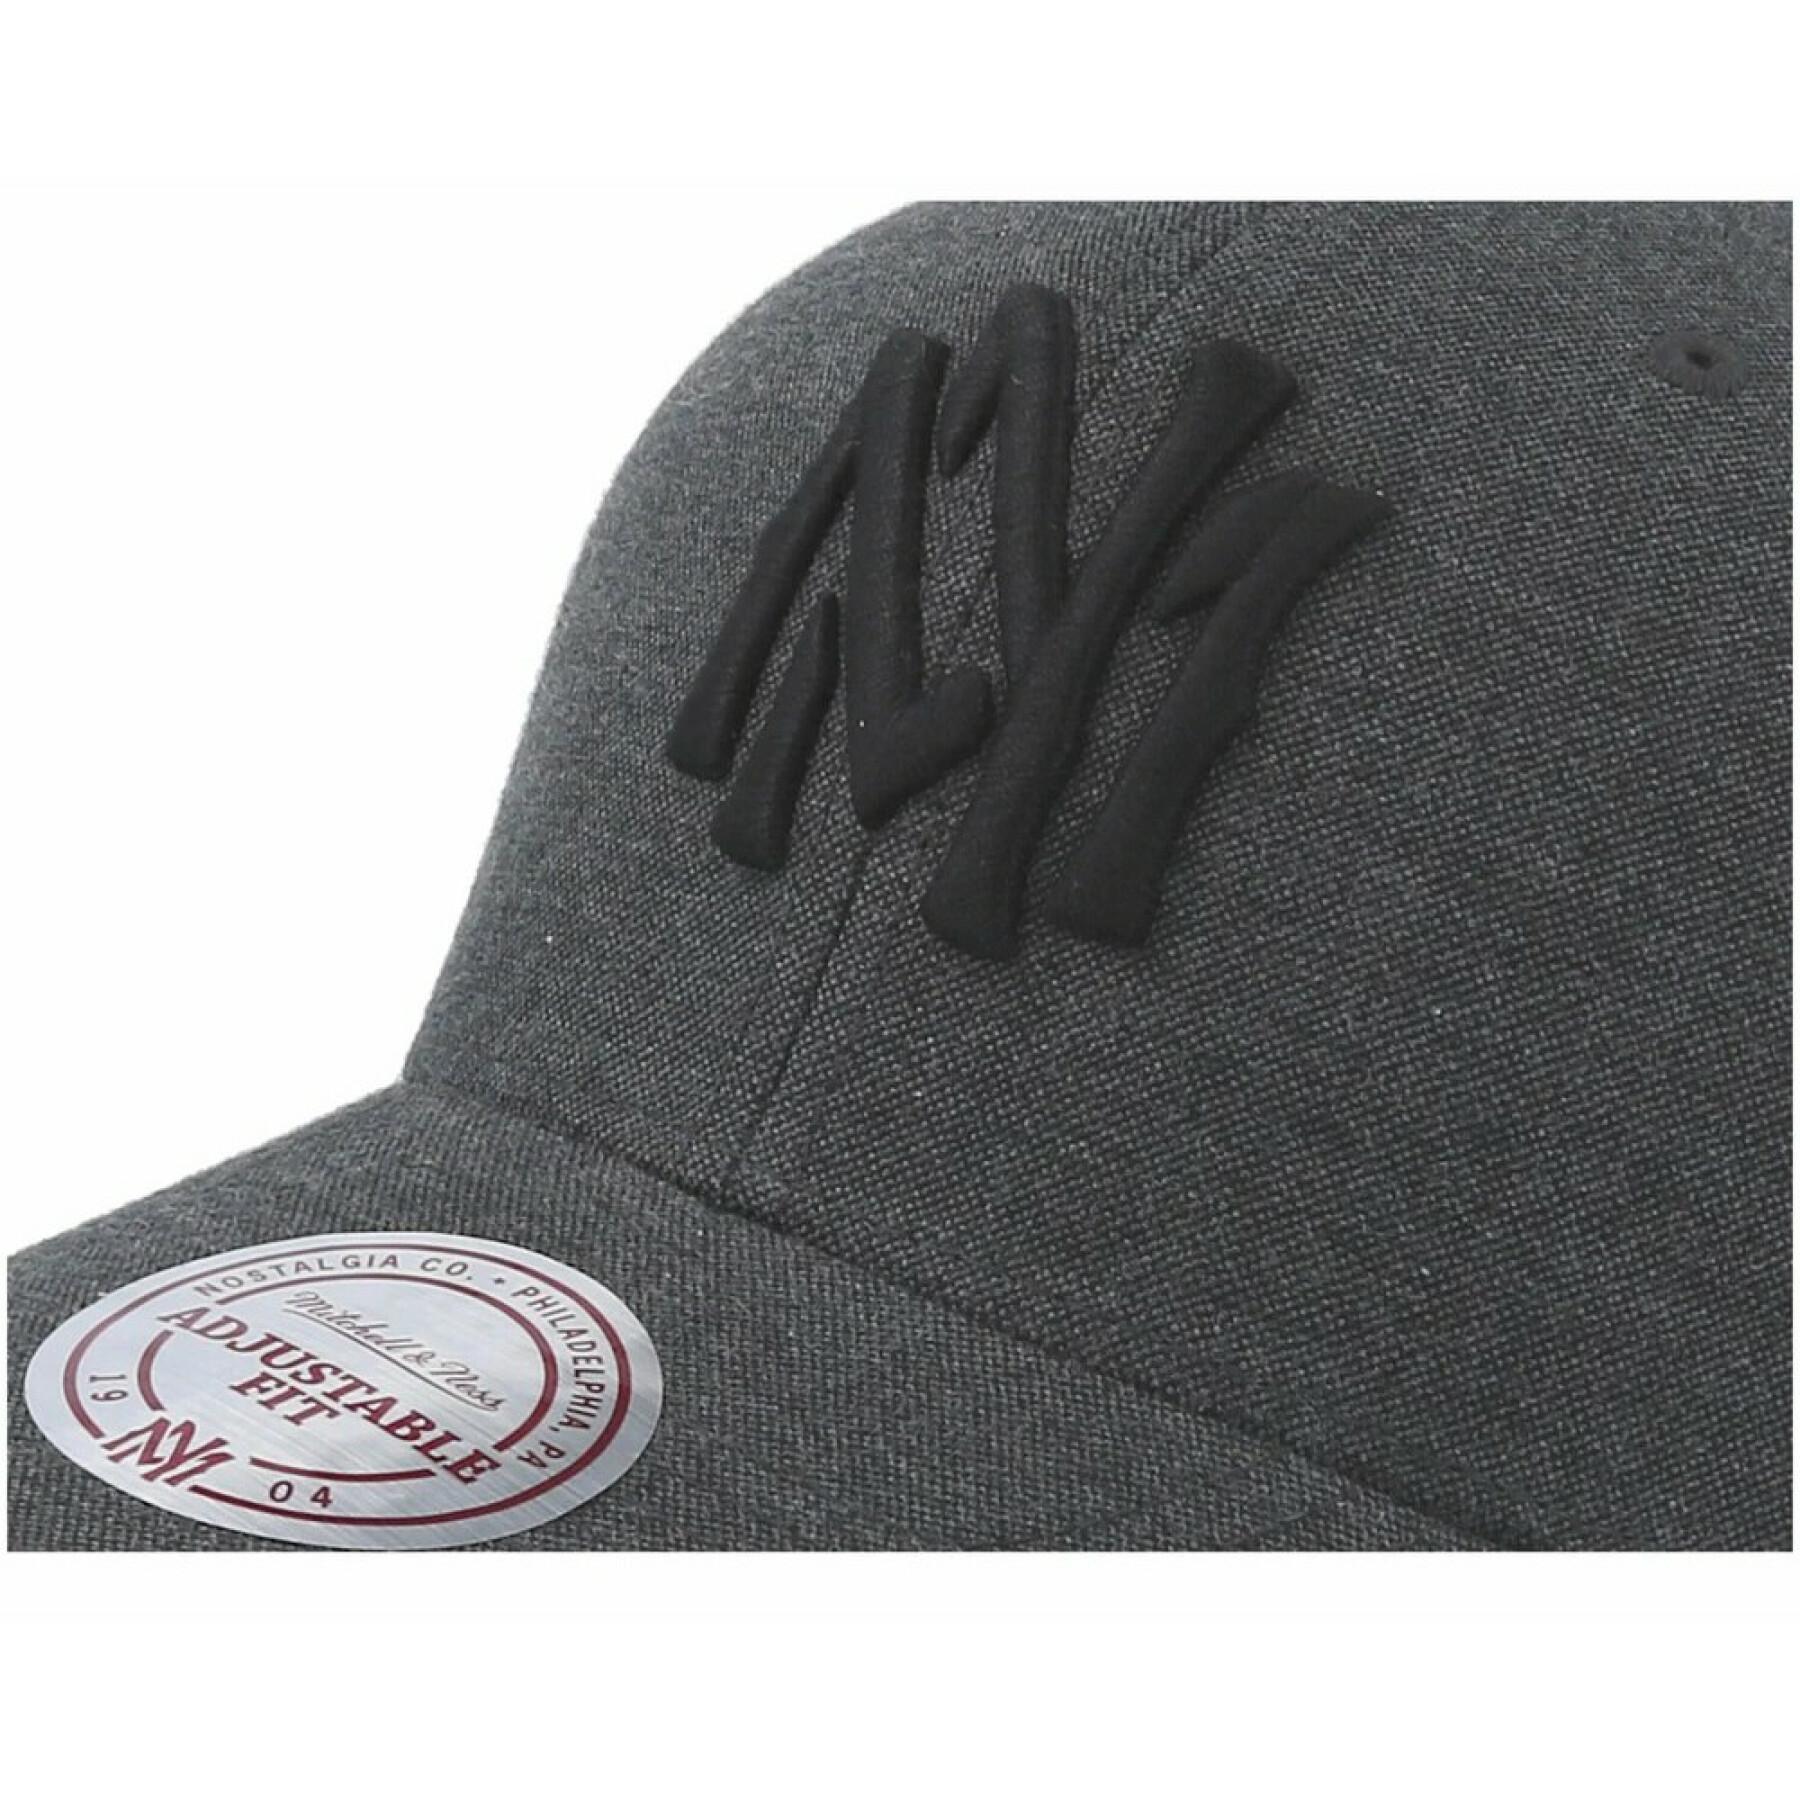 Casquette Mitchell & Ness tints